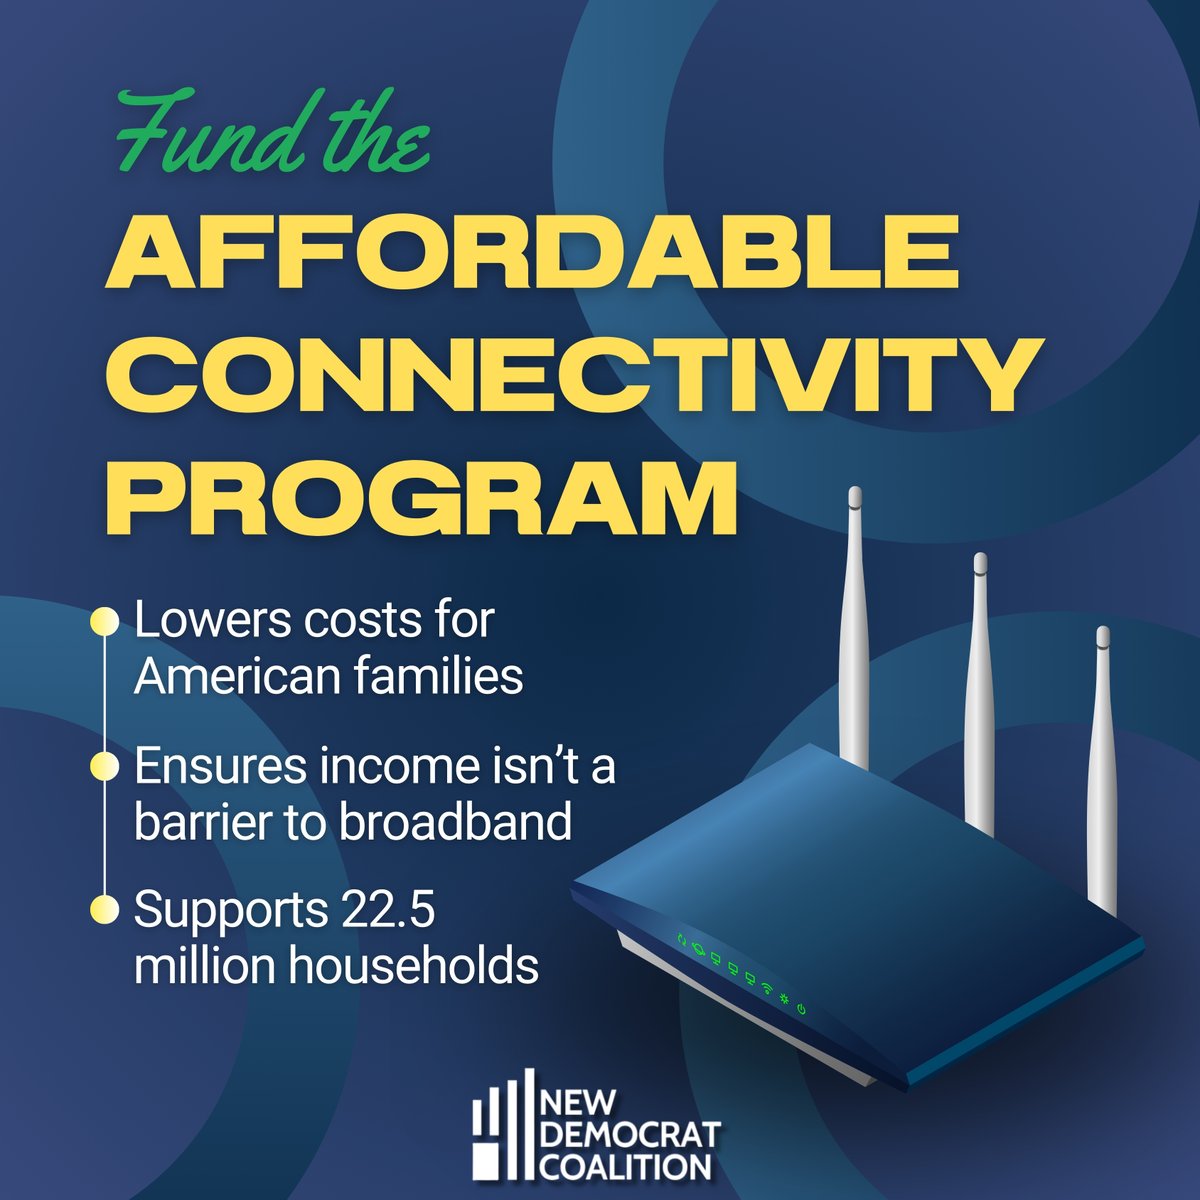 Tonight, funding runs out for the Affordable Connectivity Program. This program has expanded internet access to 91,000 households in #TX28 and has saved my constituents $47,680,000. Congress must come together and extend this vital program to ensure Texans can stay connected.